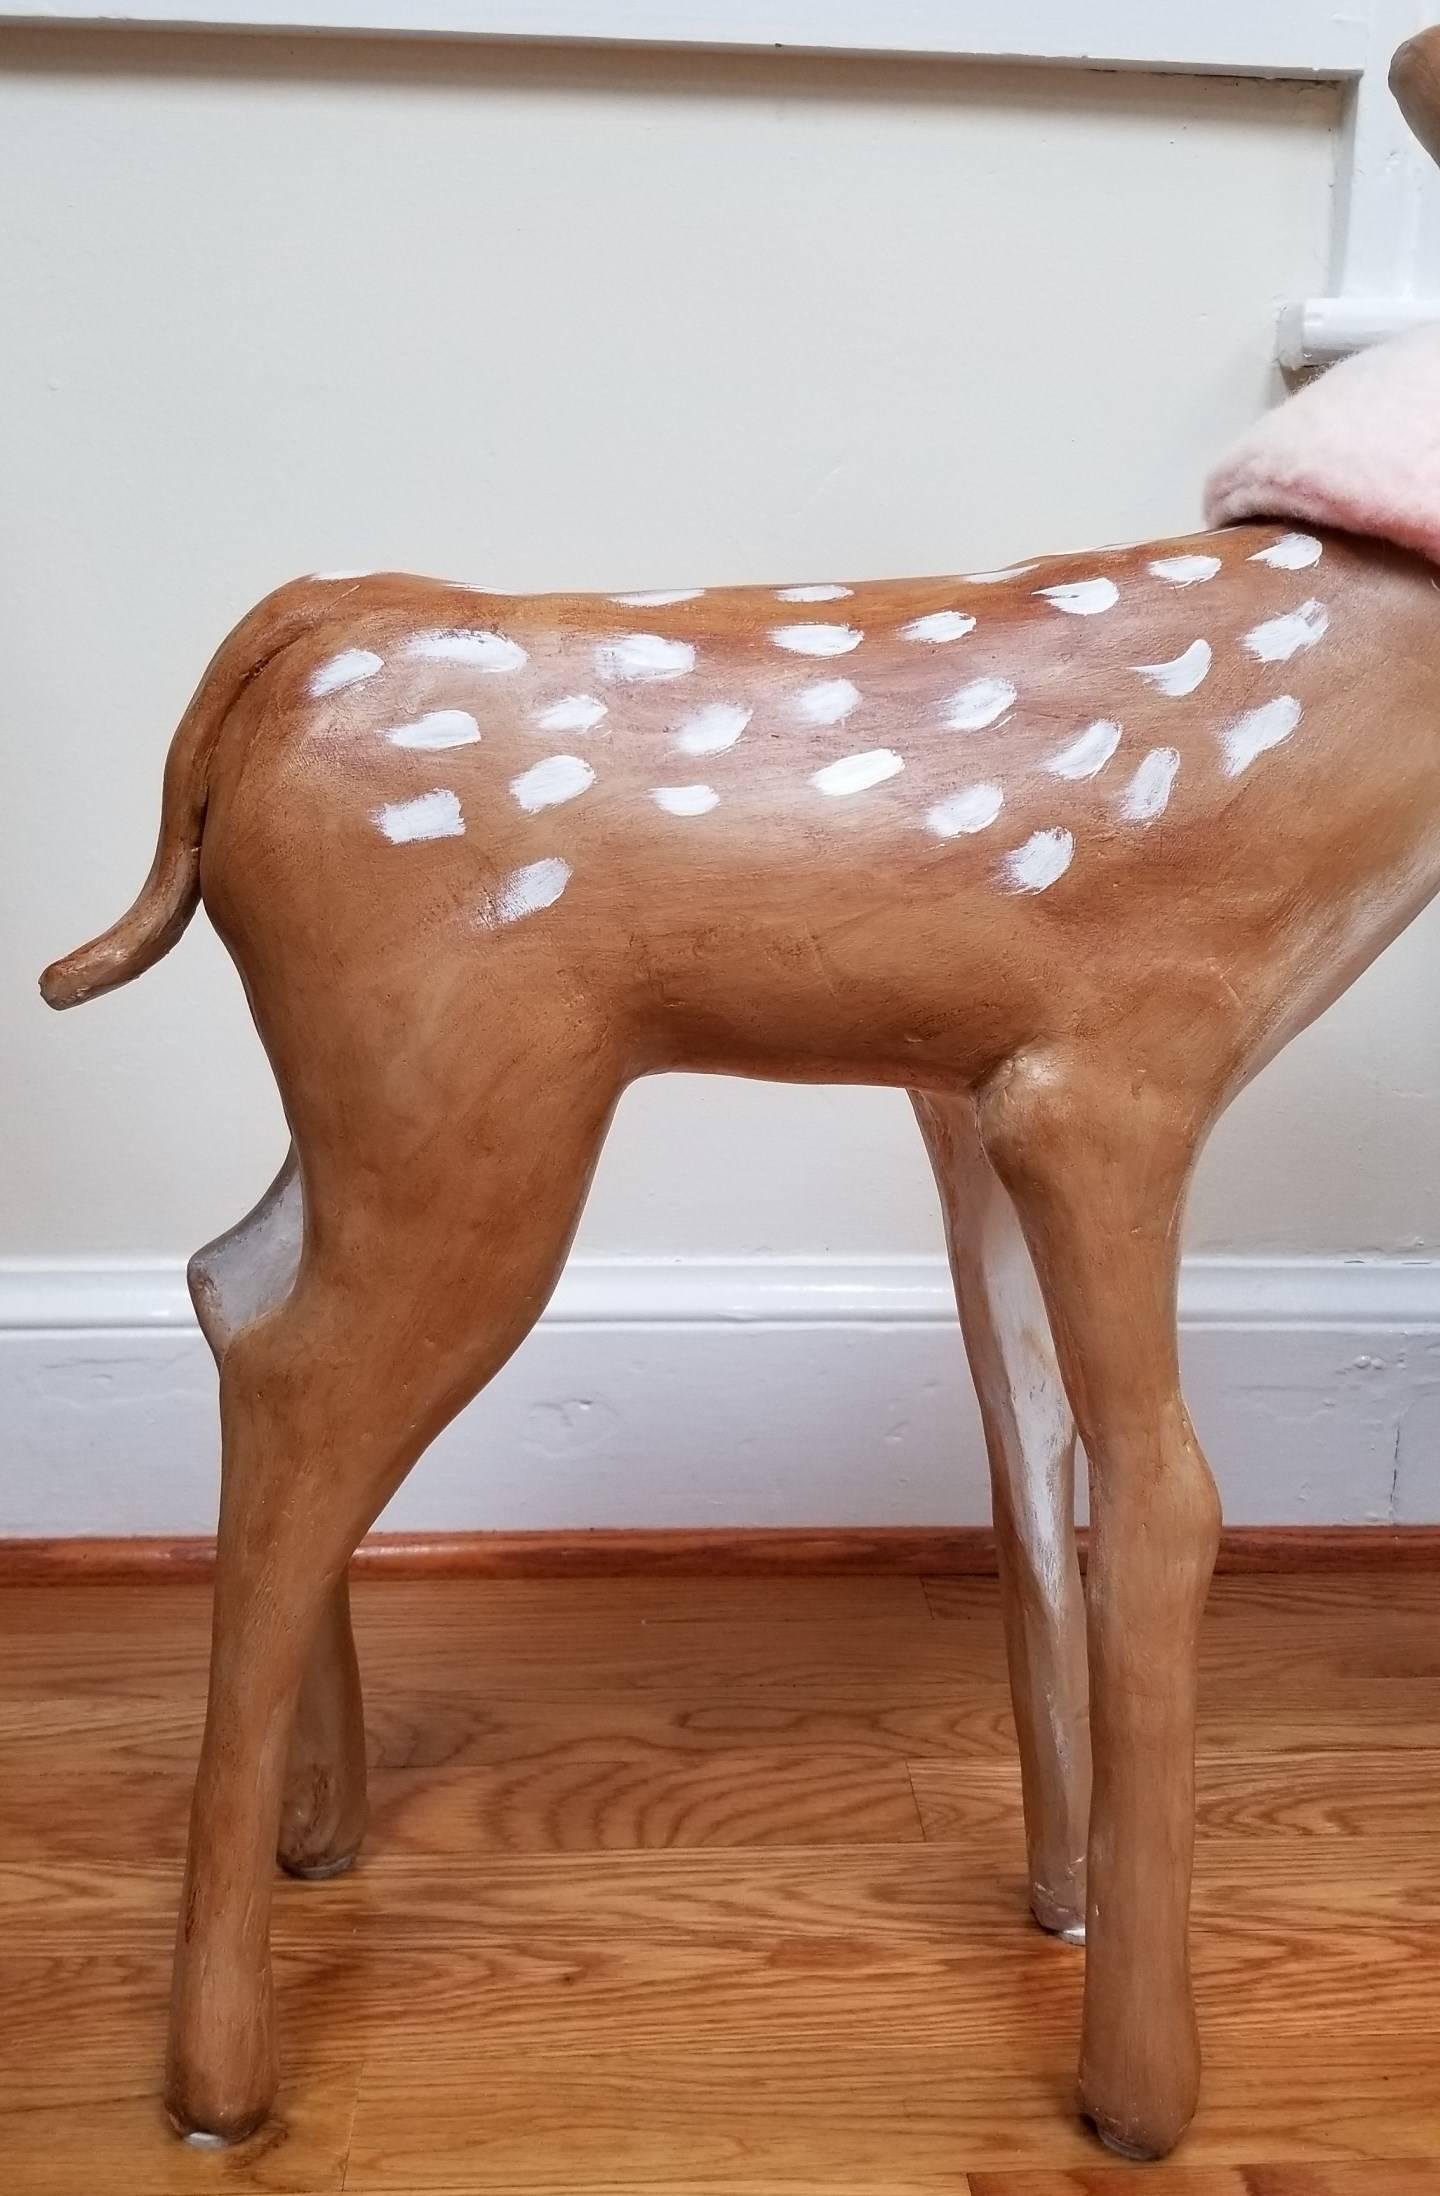 An original hand-painted pottery sculpture by American artist Paulette Brigitte Marcelle Freeman (1989-) titled "Virginia Doe", 2015. Sculpture measures: 28 tall x 9" wide x 26" deep. Weight: roughly 15 lbs. In excellent